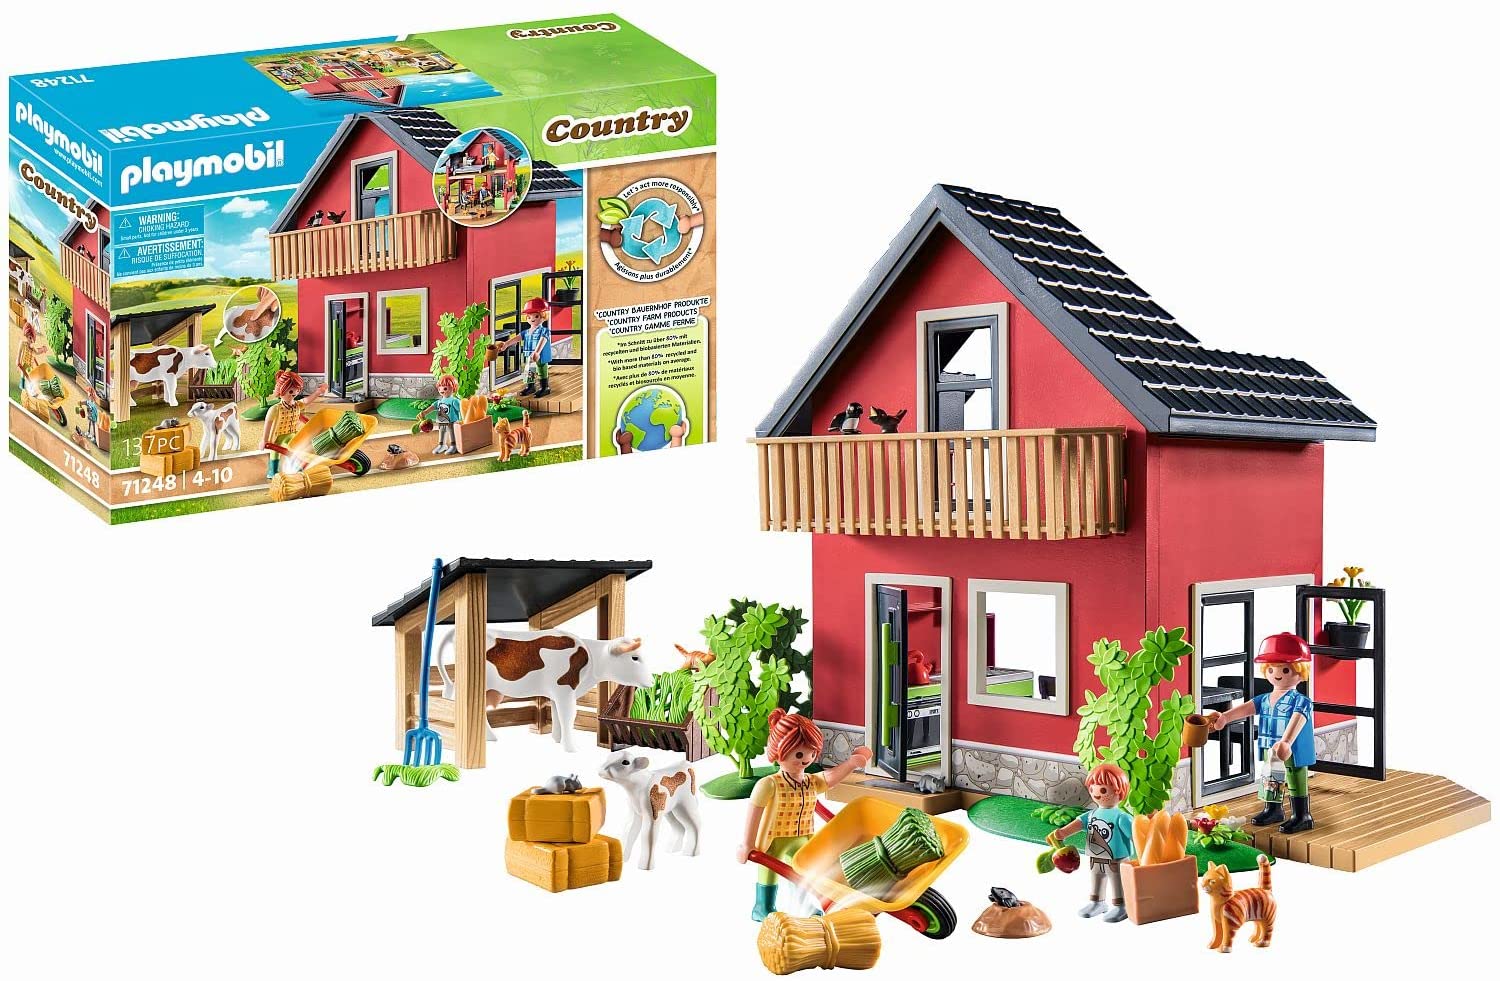 Playmobil Country 71248 Farmhouse, Living House with many Yard Animals, Organic Farm, Sustainable Toy for Children from 4 years